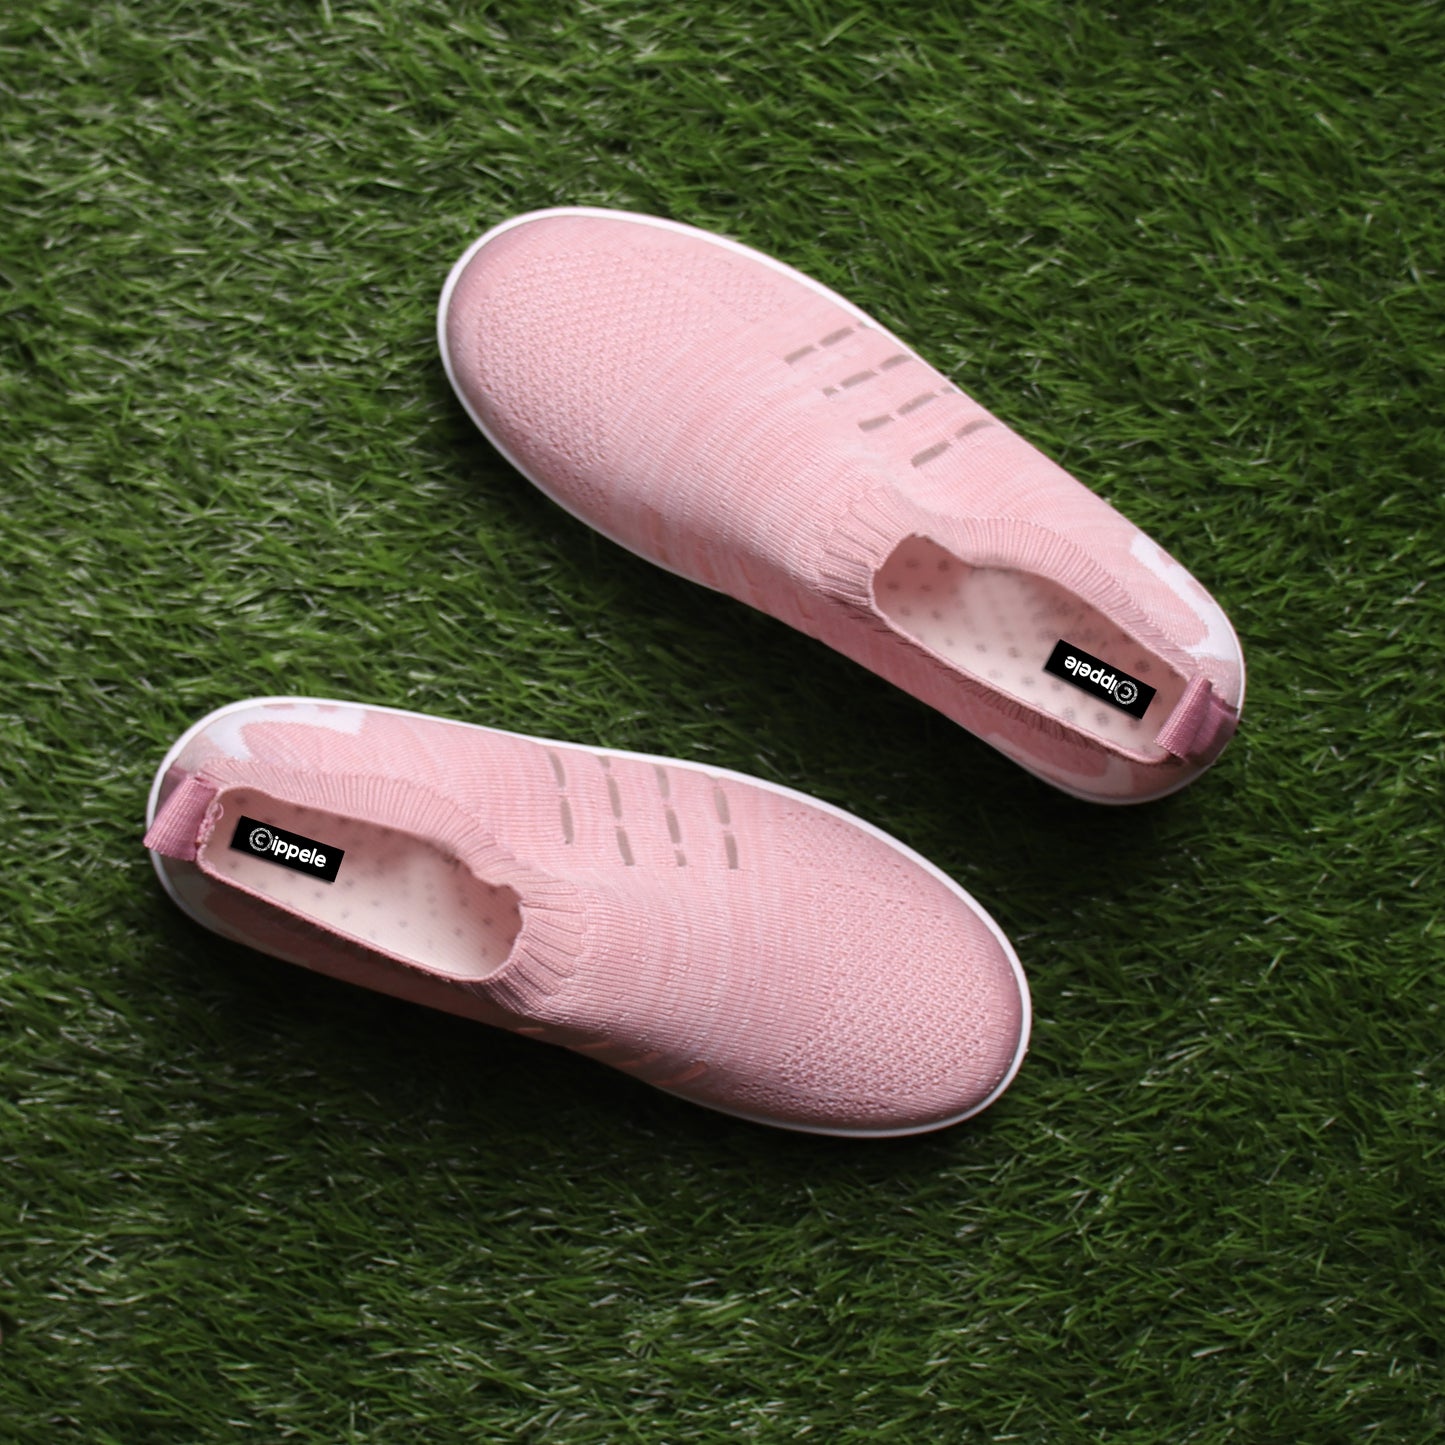 Foot Wear,The Cheerful Intimate Gliders in Pink - Cippele Multi Store